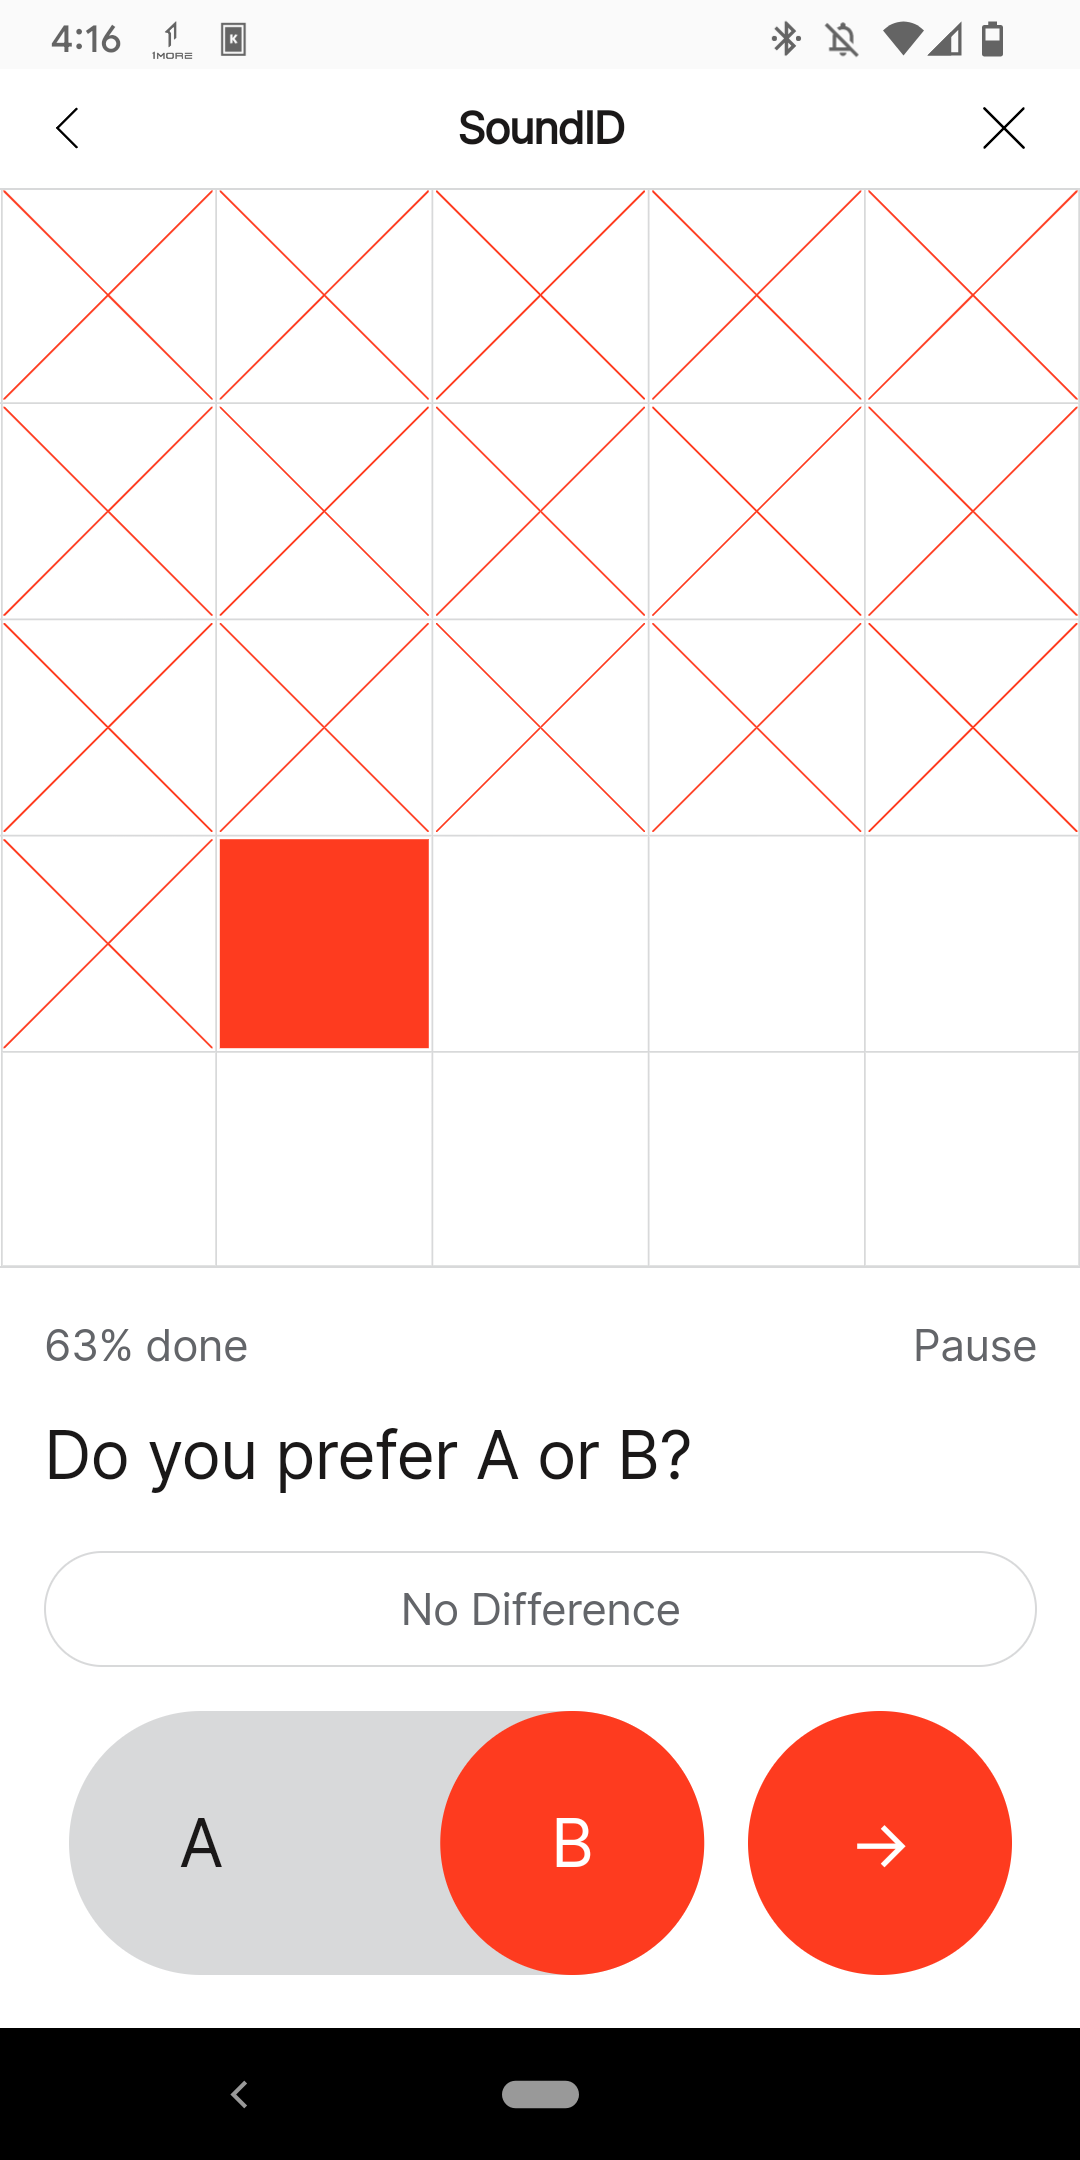 A screenshot of the SoundID app showing the test in progress asking "Do you prefer A or B?"